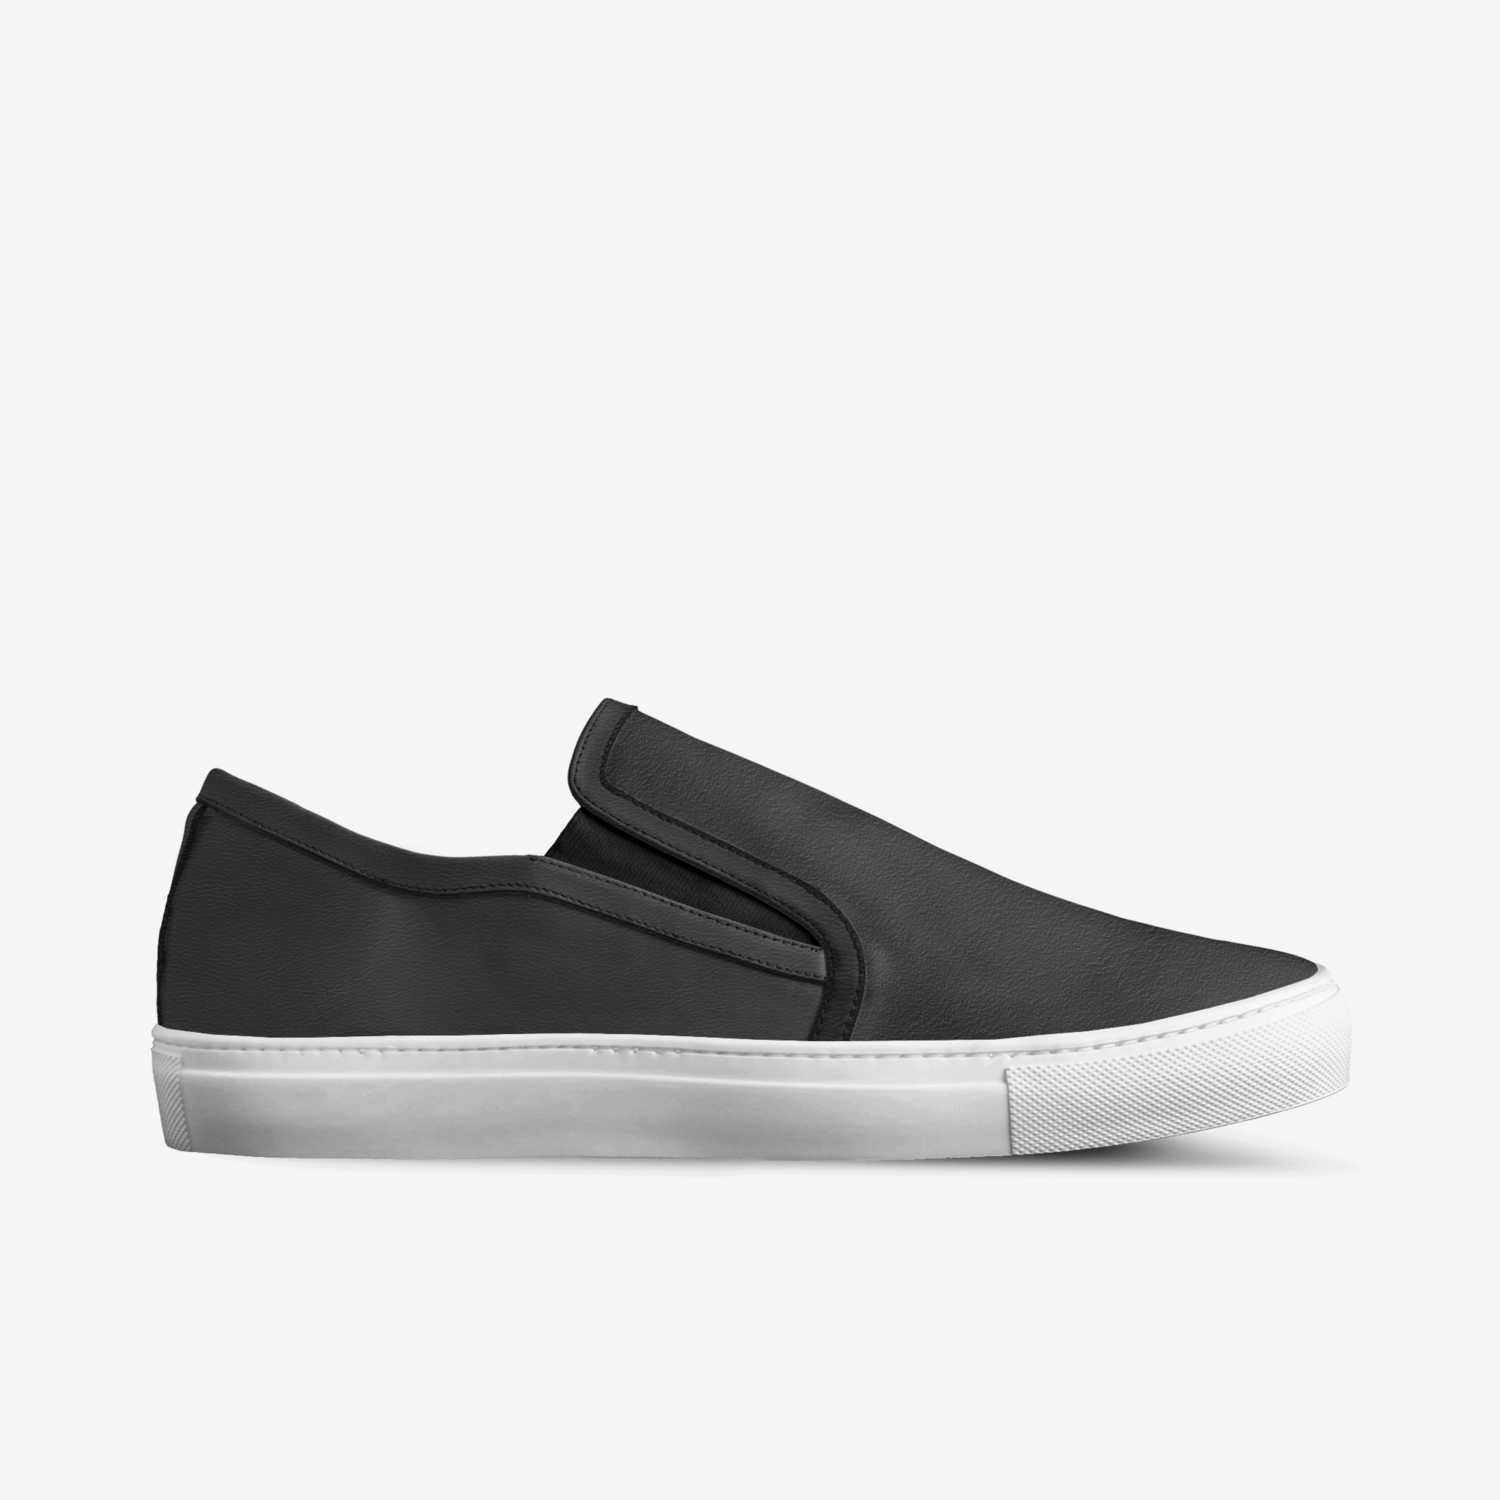 Blackie | A Custom Shoe concept by Beatrice Redi